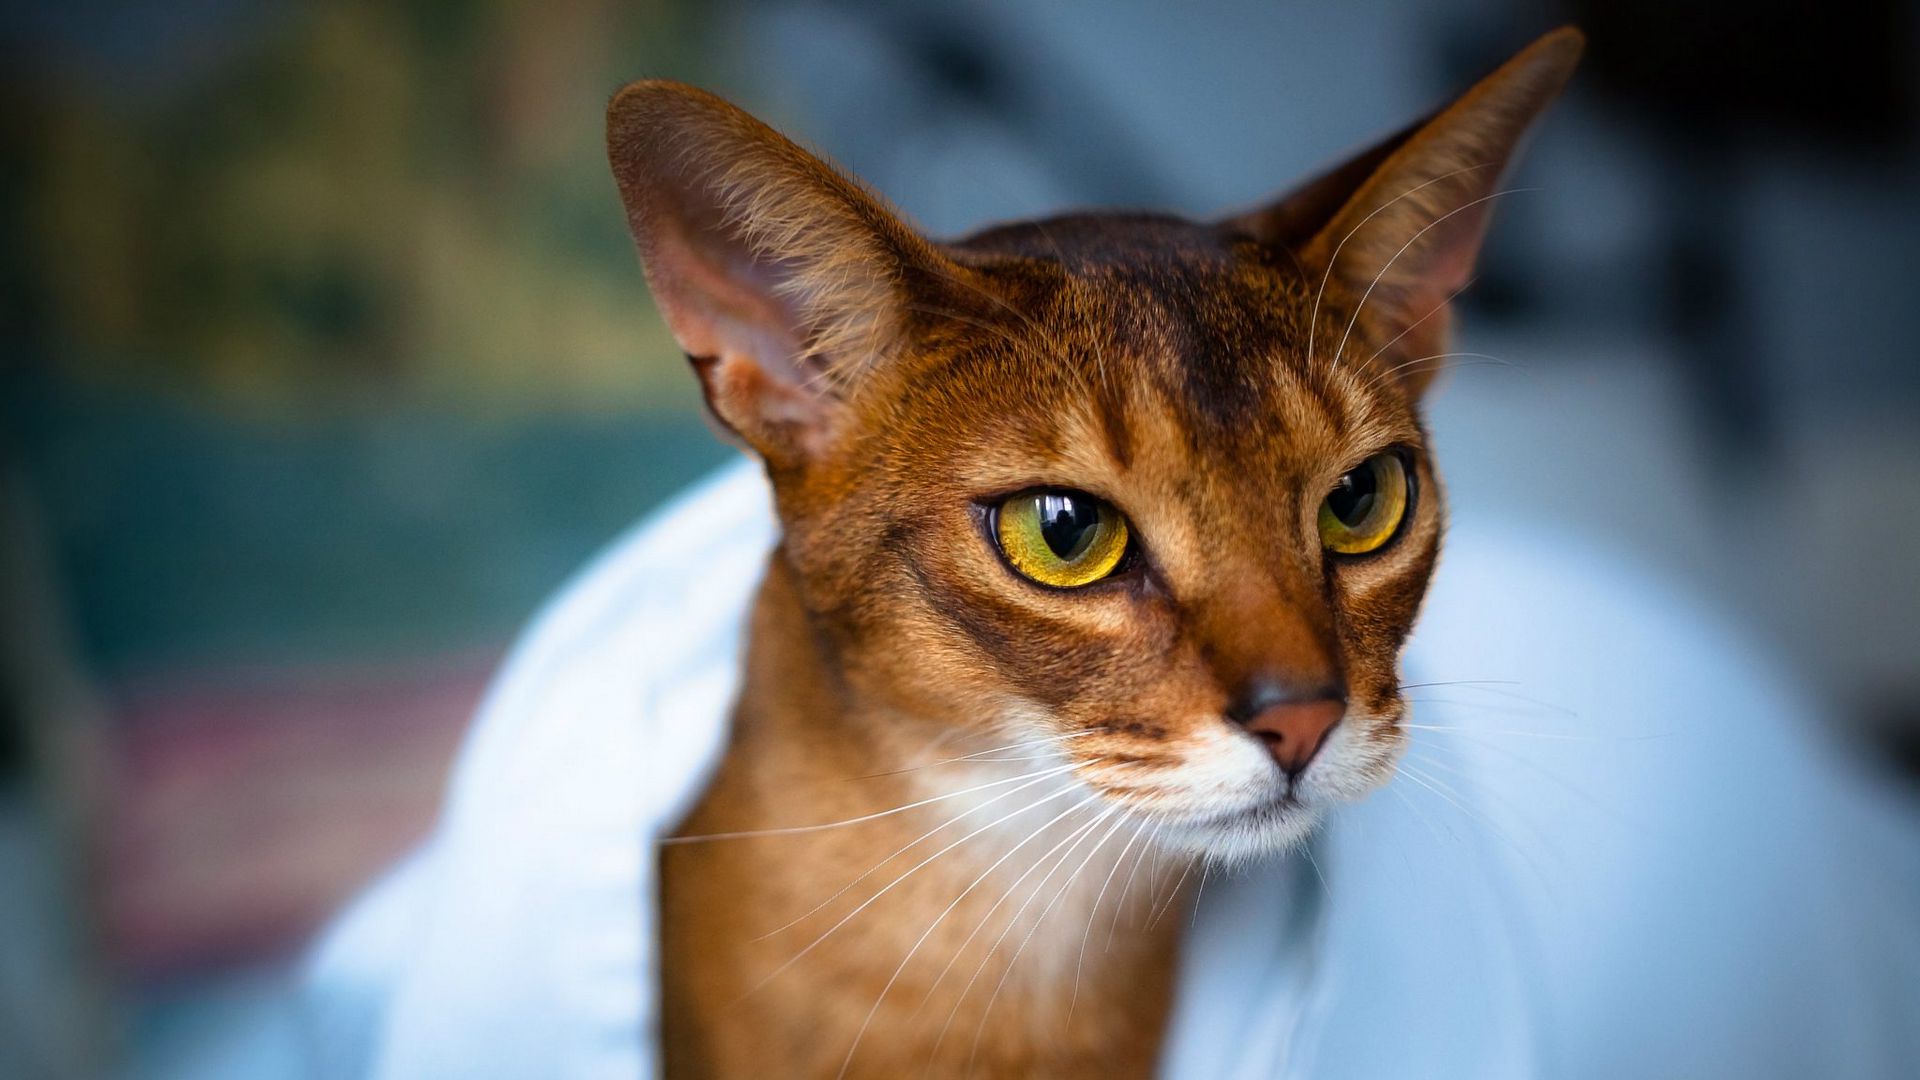 Download wallpaper 1920x1080 abyssinian cat, face, eyes, beautiful, cat full hd, hdtv, fhd, 1080p HD background